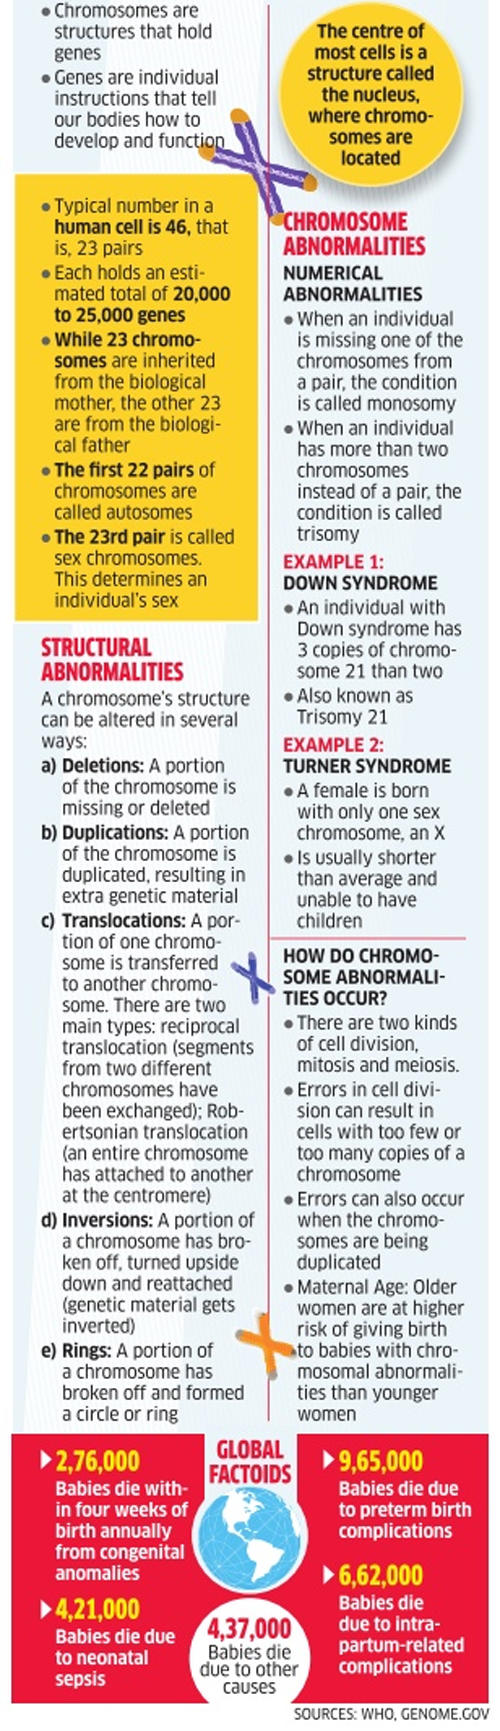 chromosome-abnormalities-can-be-inherited-from-parents-the-economic-times